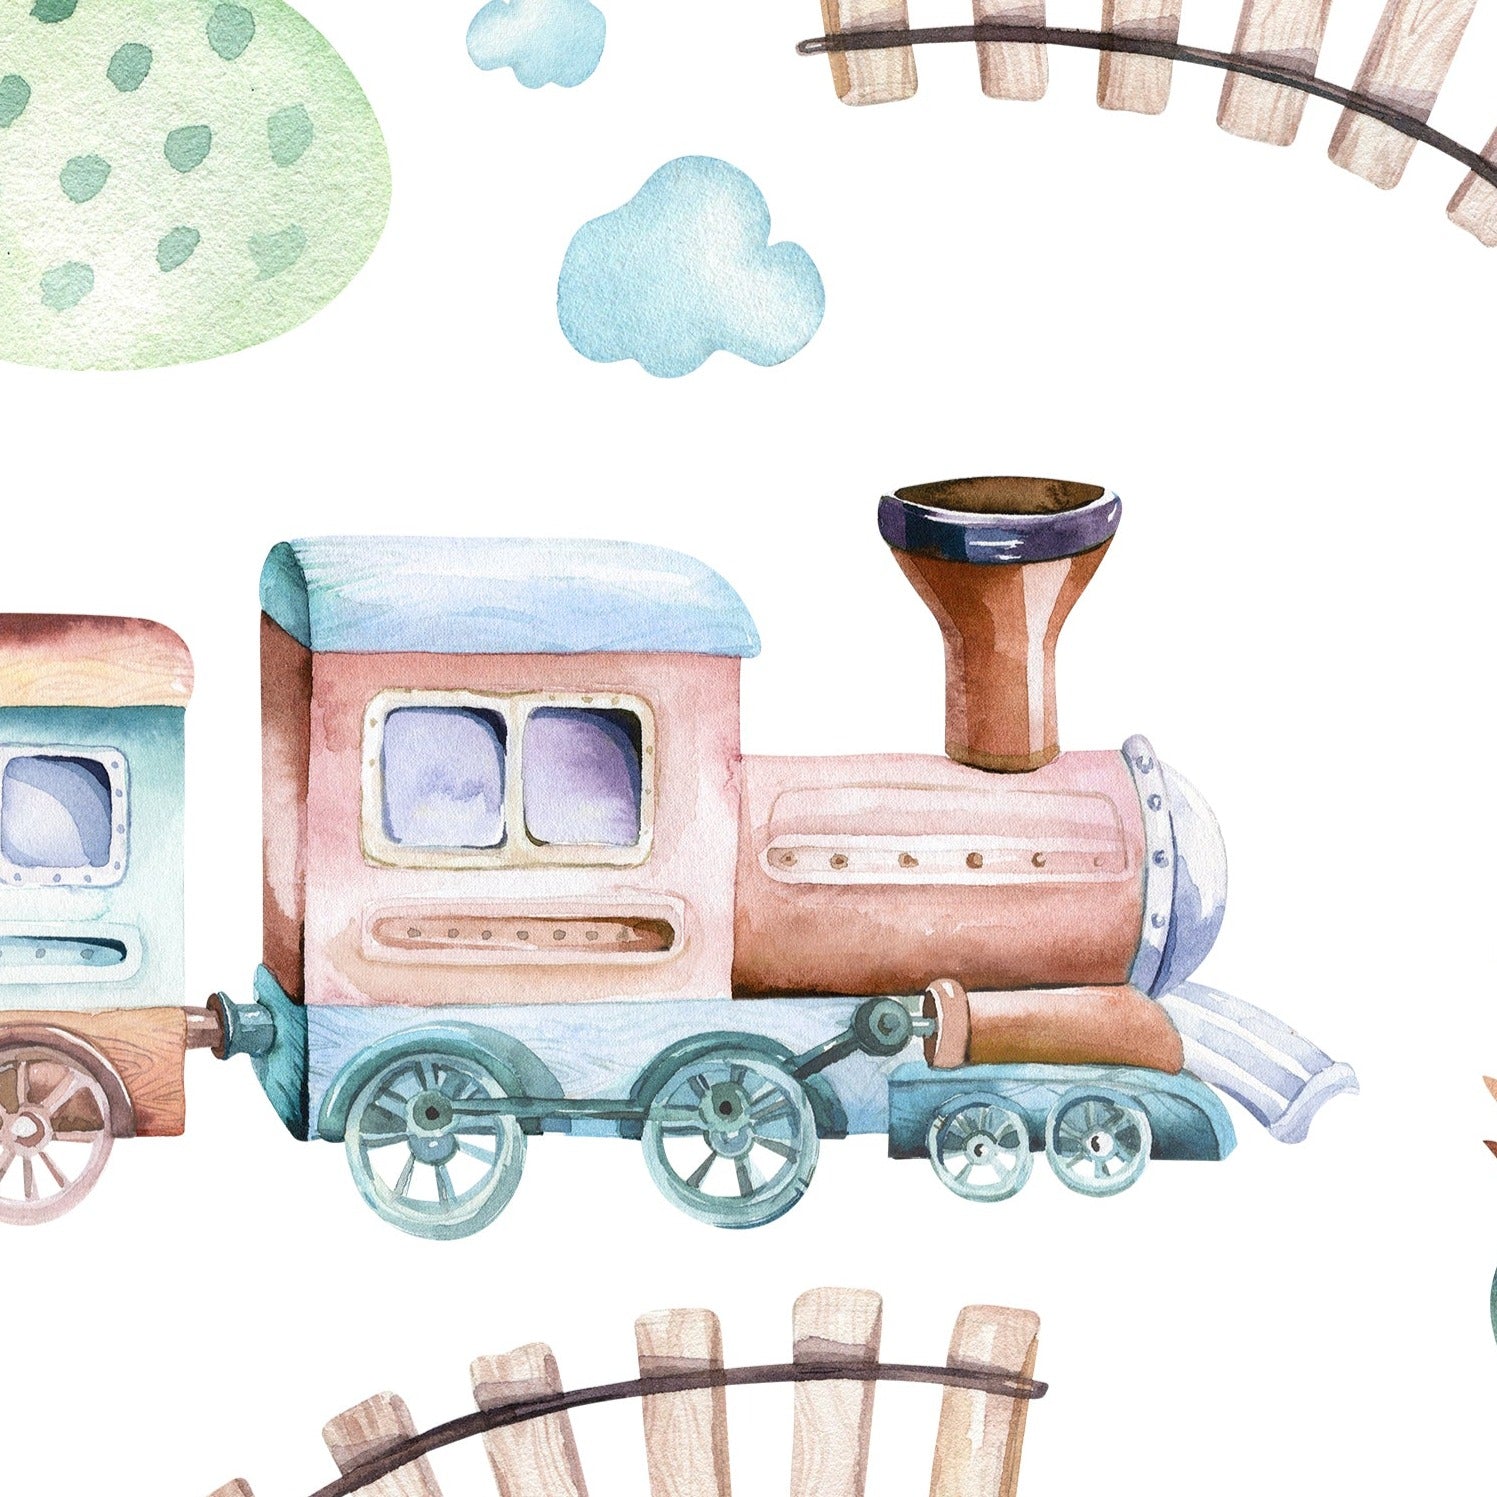 Close-up view of 'Trains and Planes Kids Wallpaper' showcasing a playful and colorful design of vintage trains, airplanes, and houses set among trees and tracks on a pastel background. The pattern includes elements like railroad tracks, fluffy clouds, and small details like leaves and birds, creating a whimsical scene.